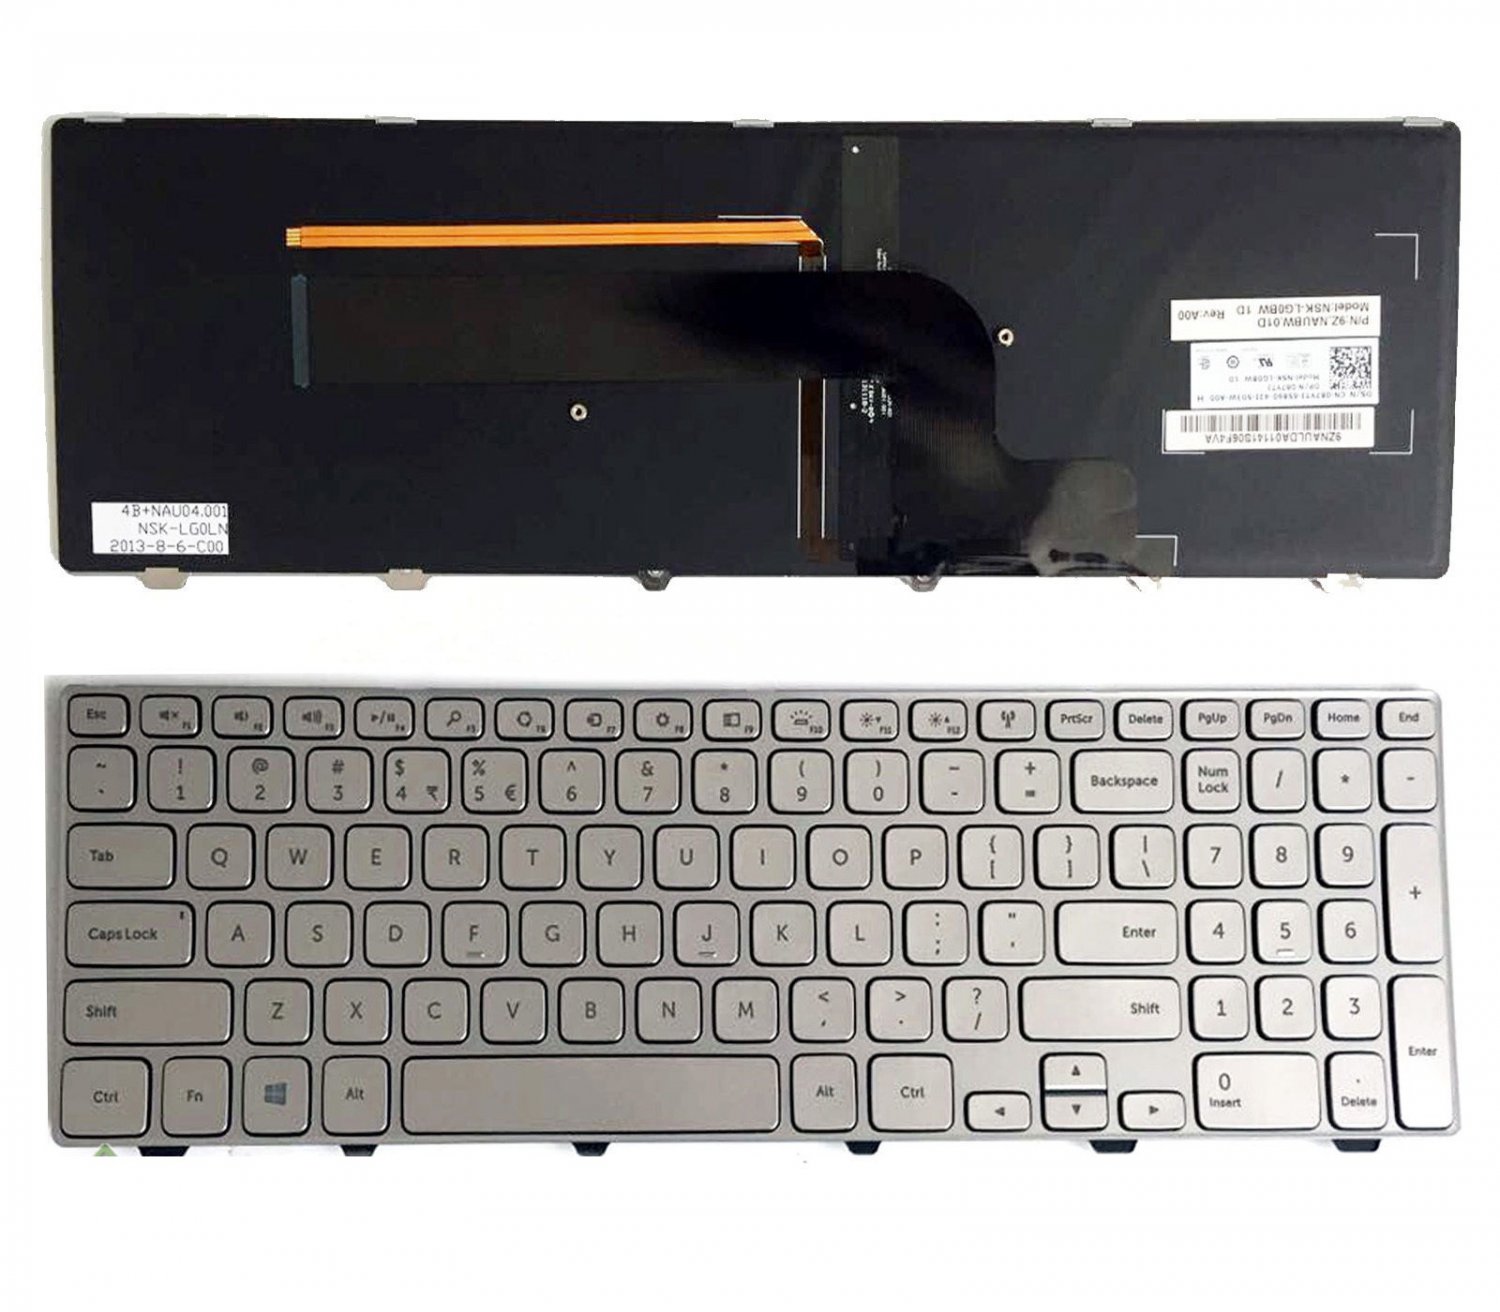 New Keyboard For Dell Inspiron 15 7000 Series 15 7537 Series Backlit 2148